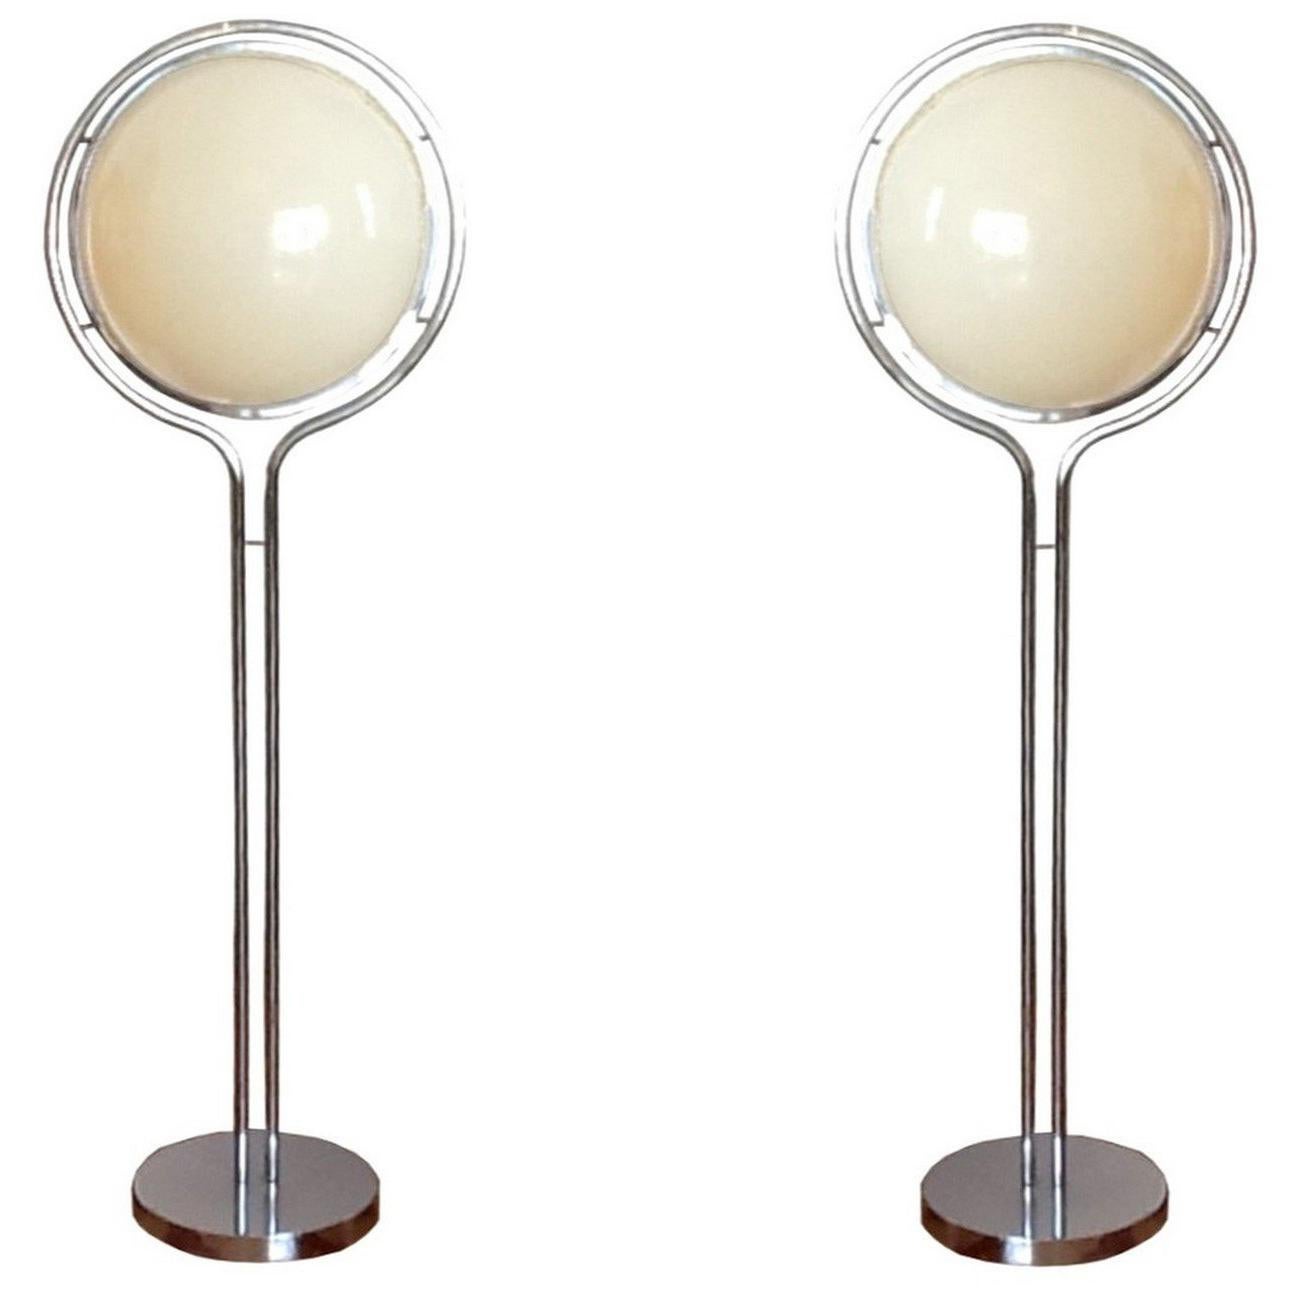 Rare Pair of Floor Lamps by Garrault and Delord, France, 1971